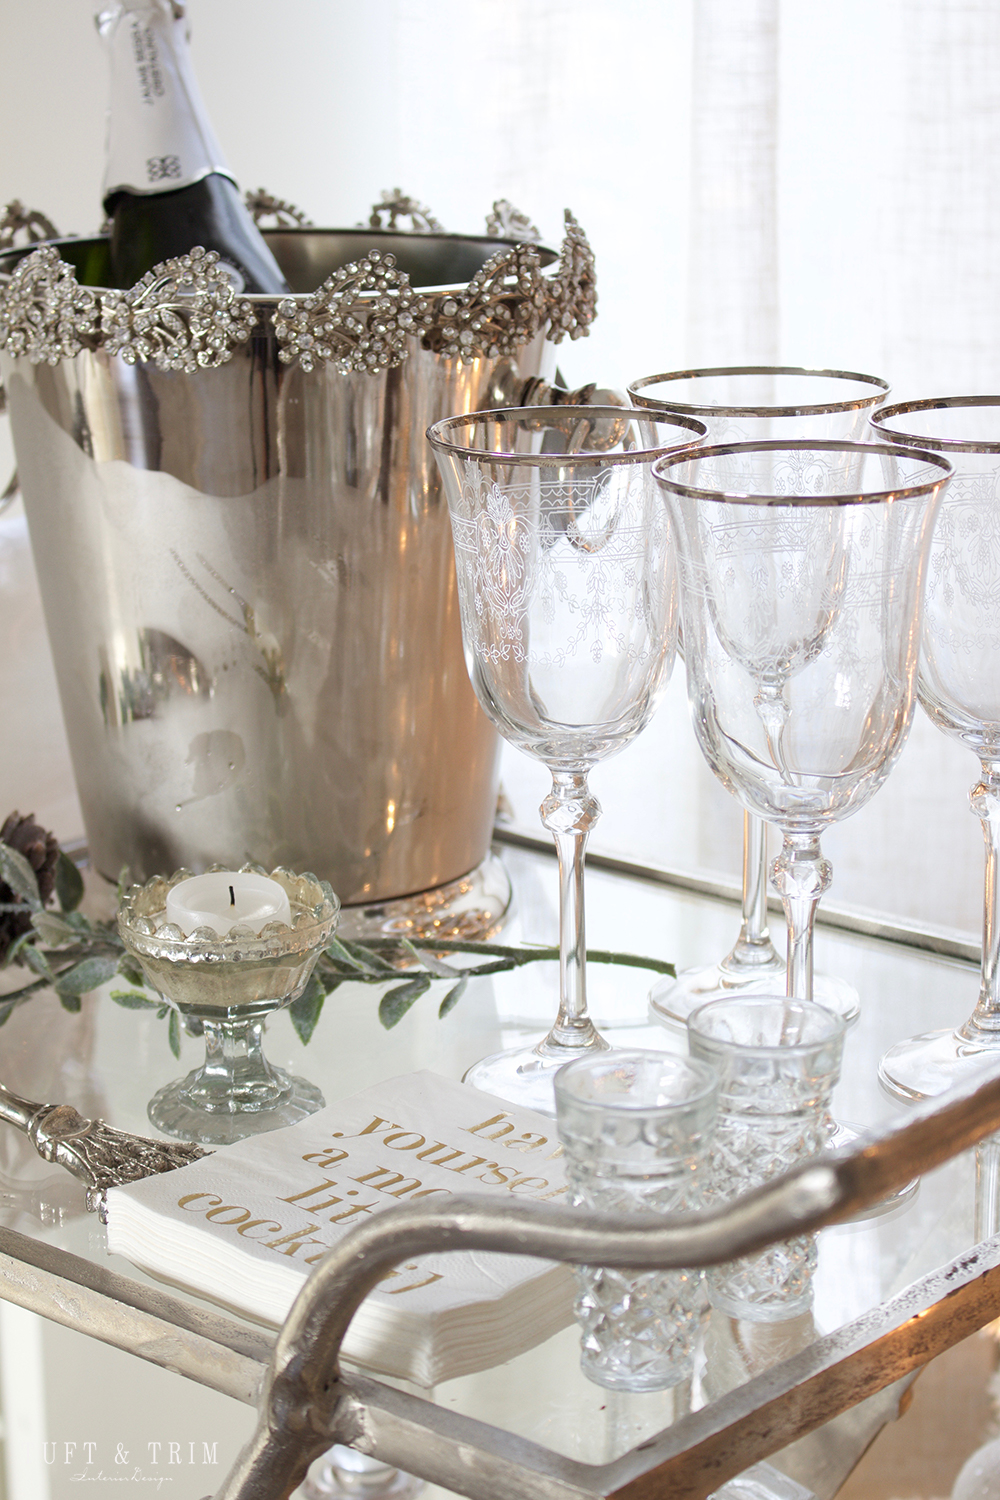 Tuft & Trim Interior Design. How to Style your Bar Cart for the Holidays